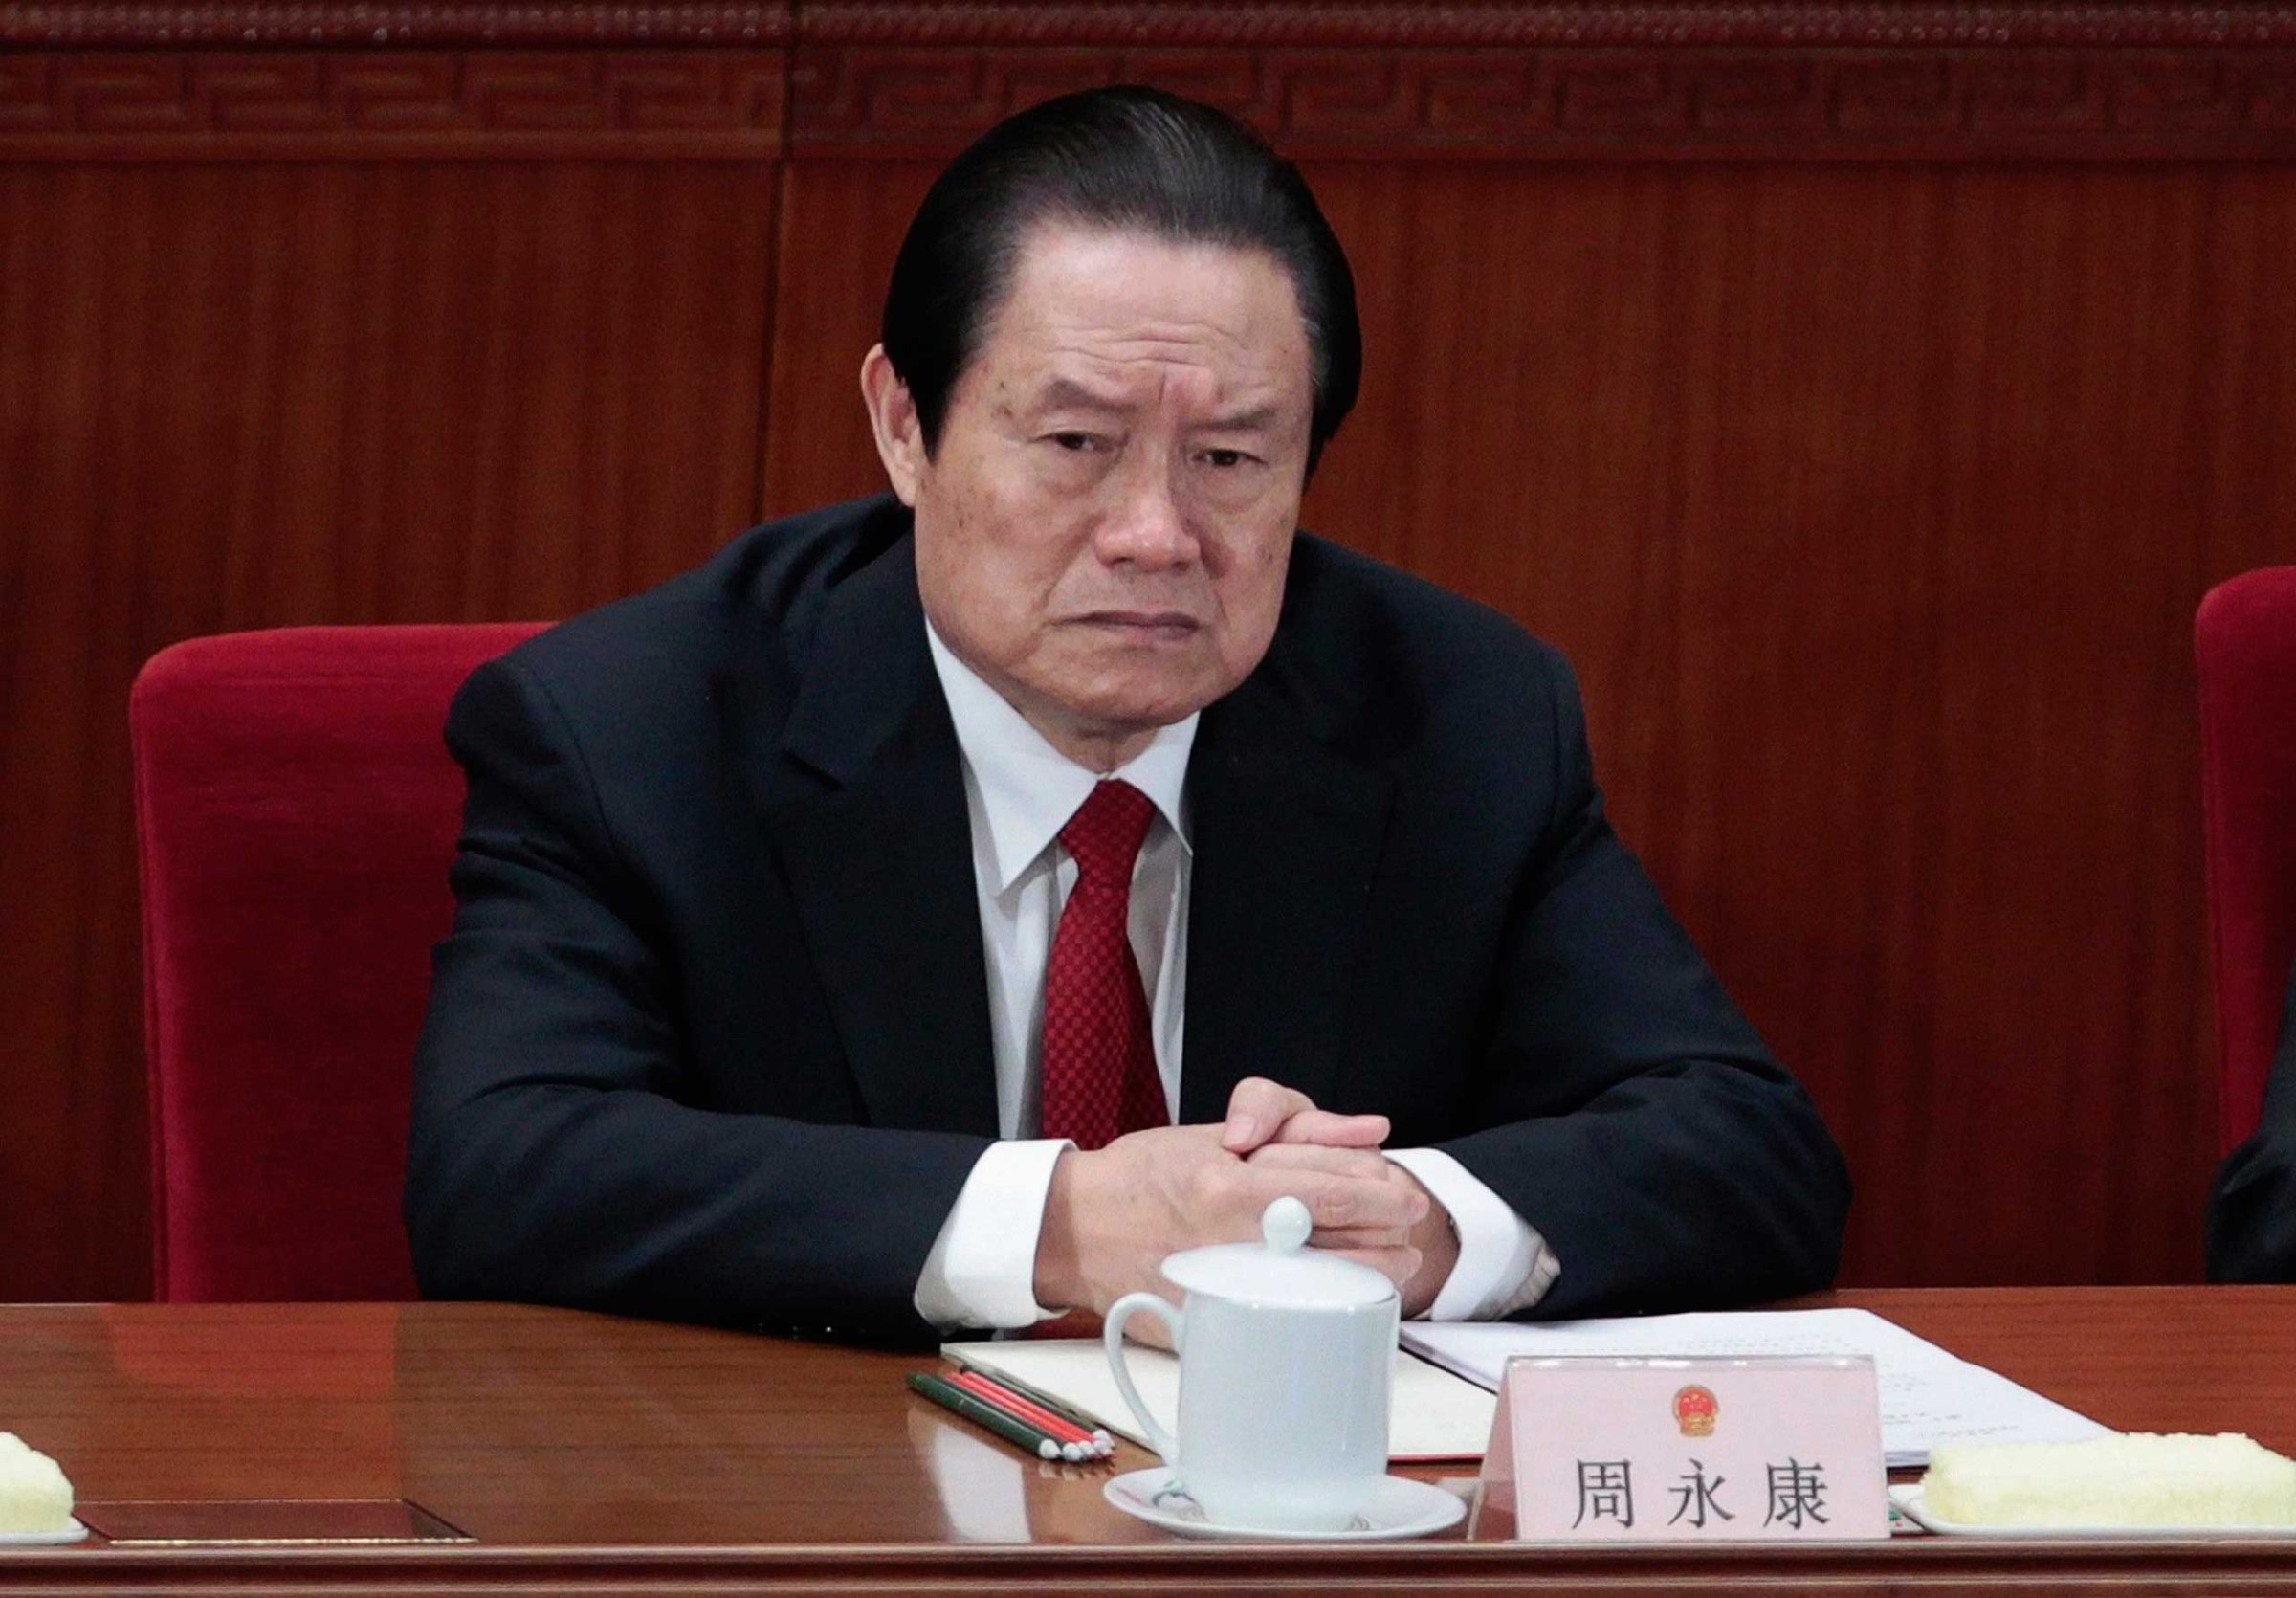 File photo of China's former Politburo Standing Committee Member Zhou Yongkang attending the closing ceremony of the NPC in Beijing